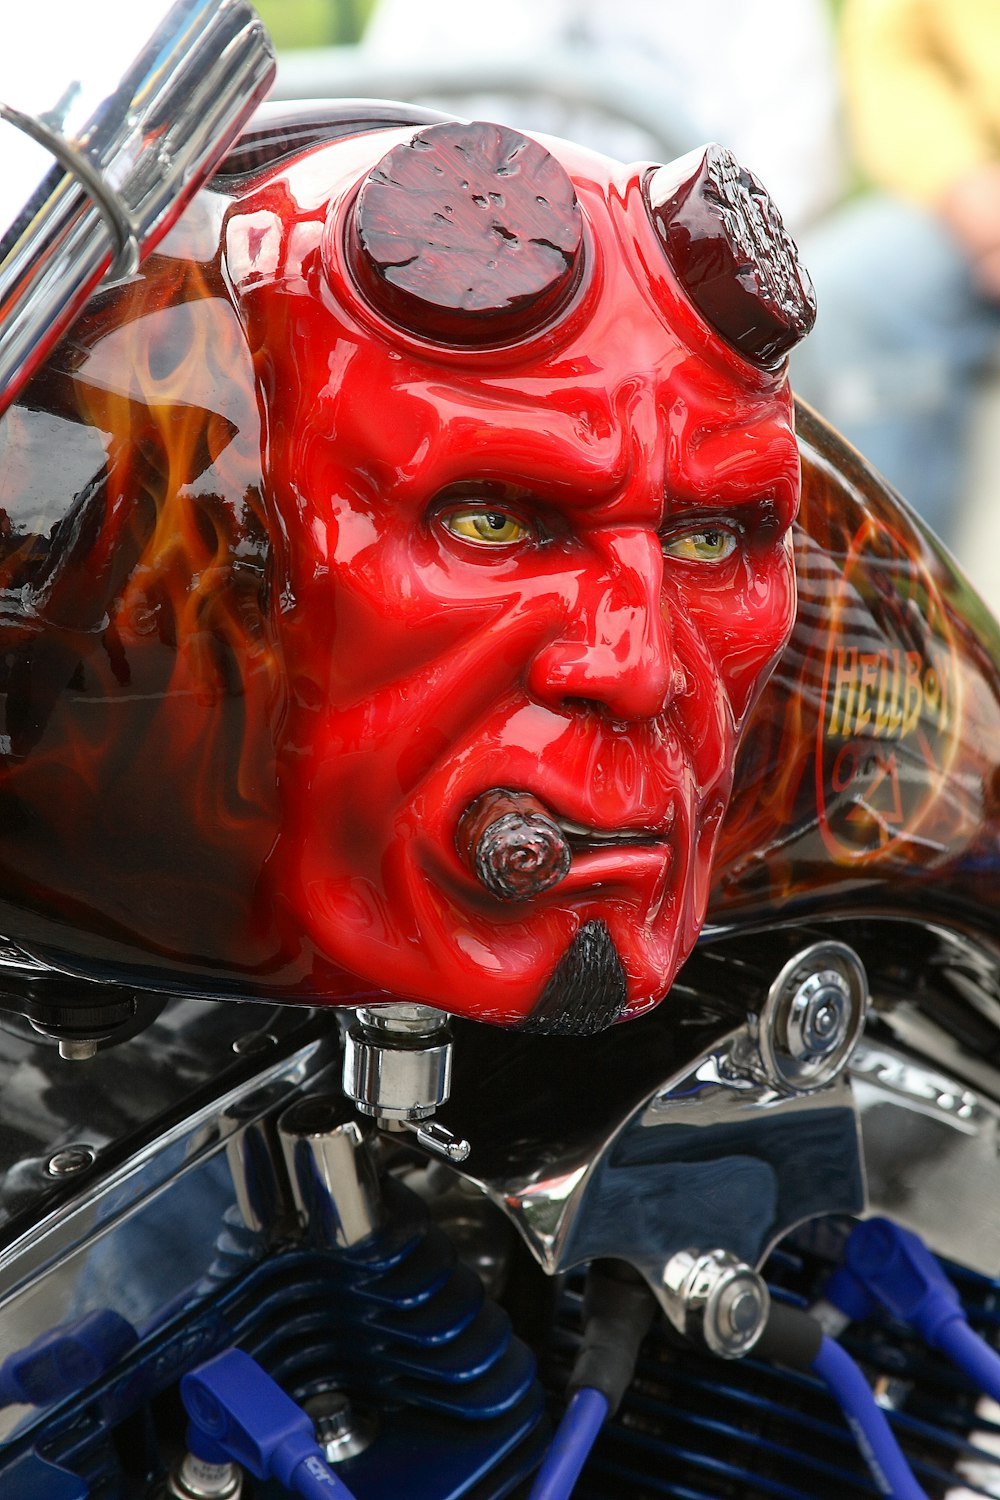 red and black motorcycle with face paint